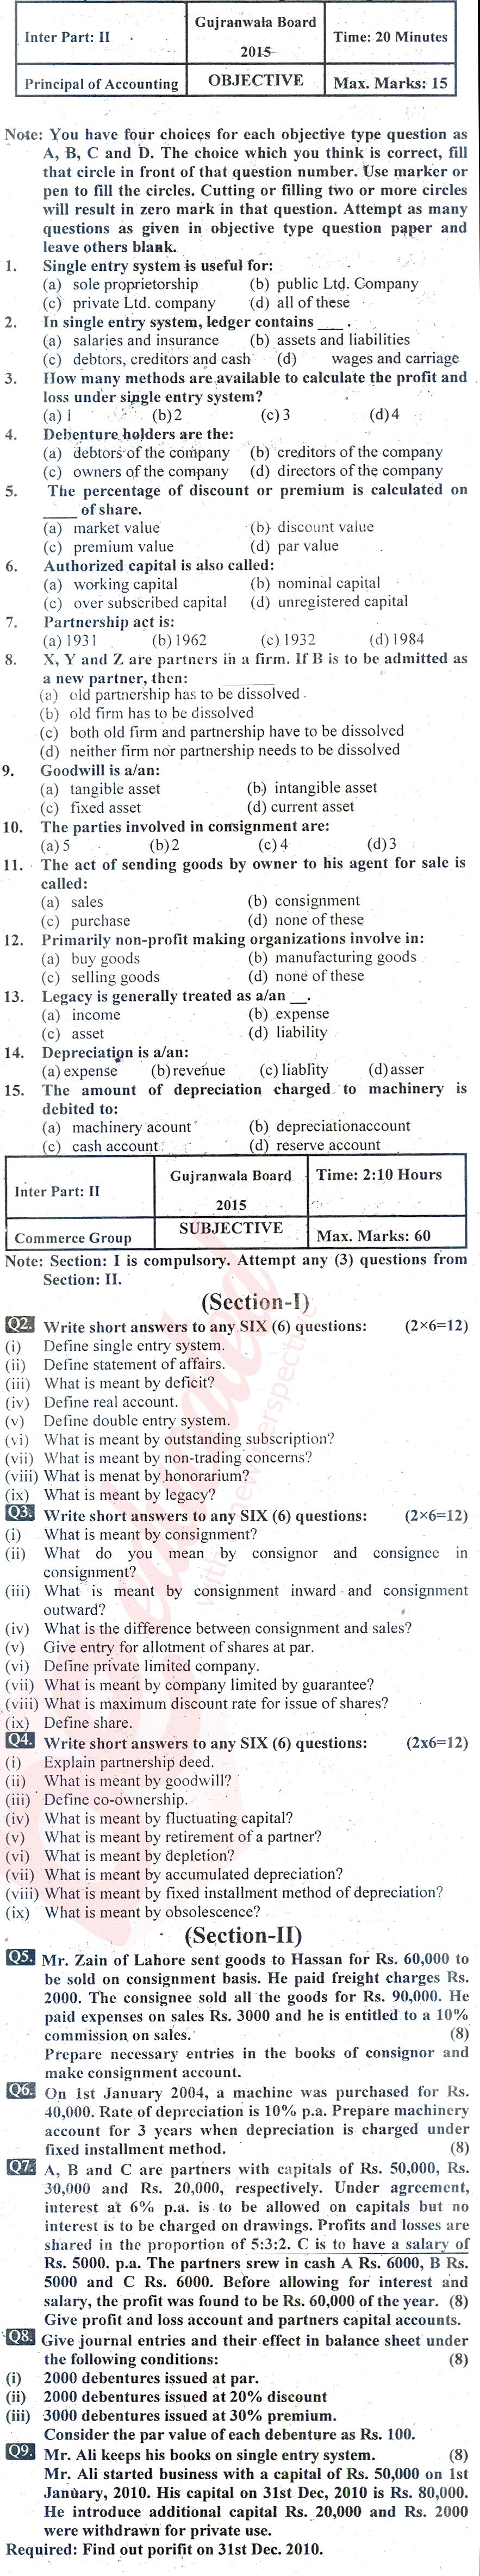 Principles of Accounting ICOM Part 2 Past Paper Group 1 BISE Gujranwala 2015